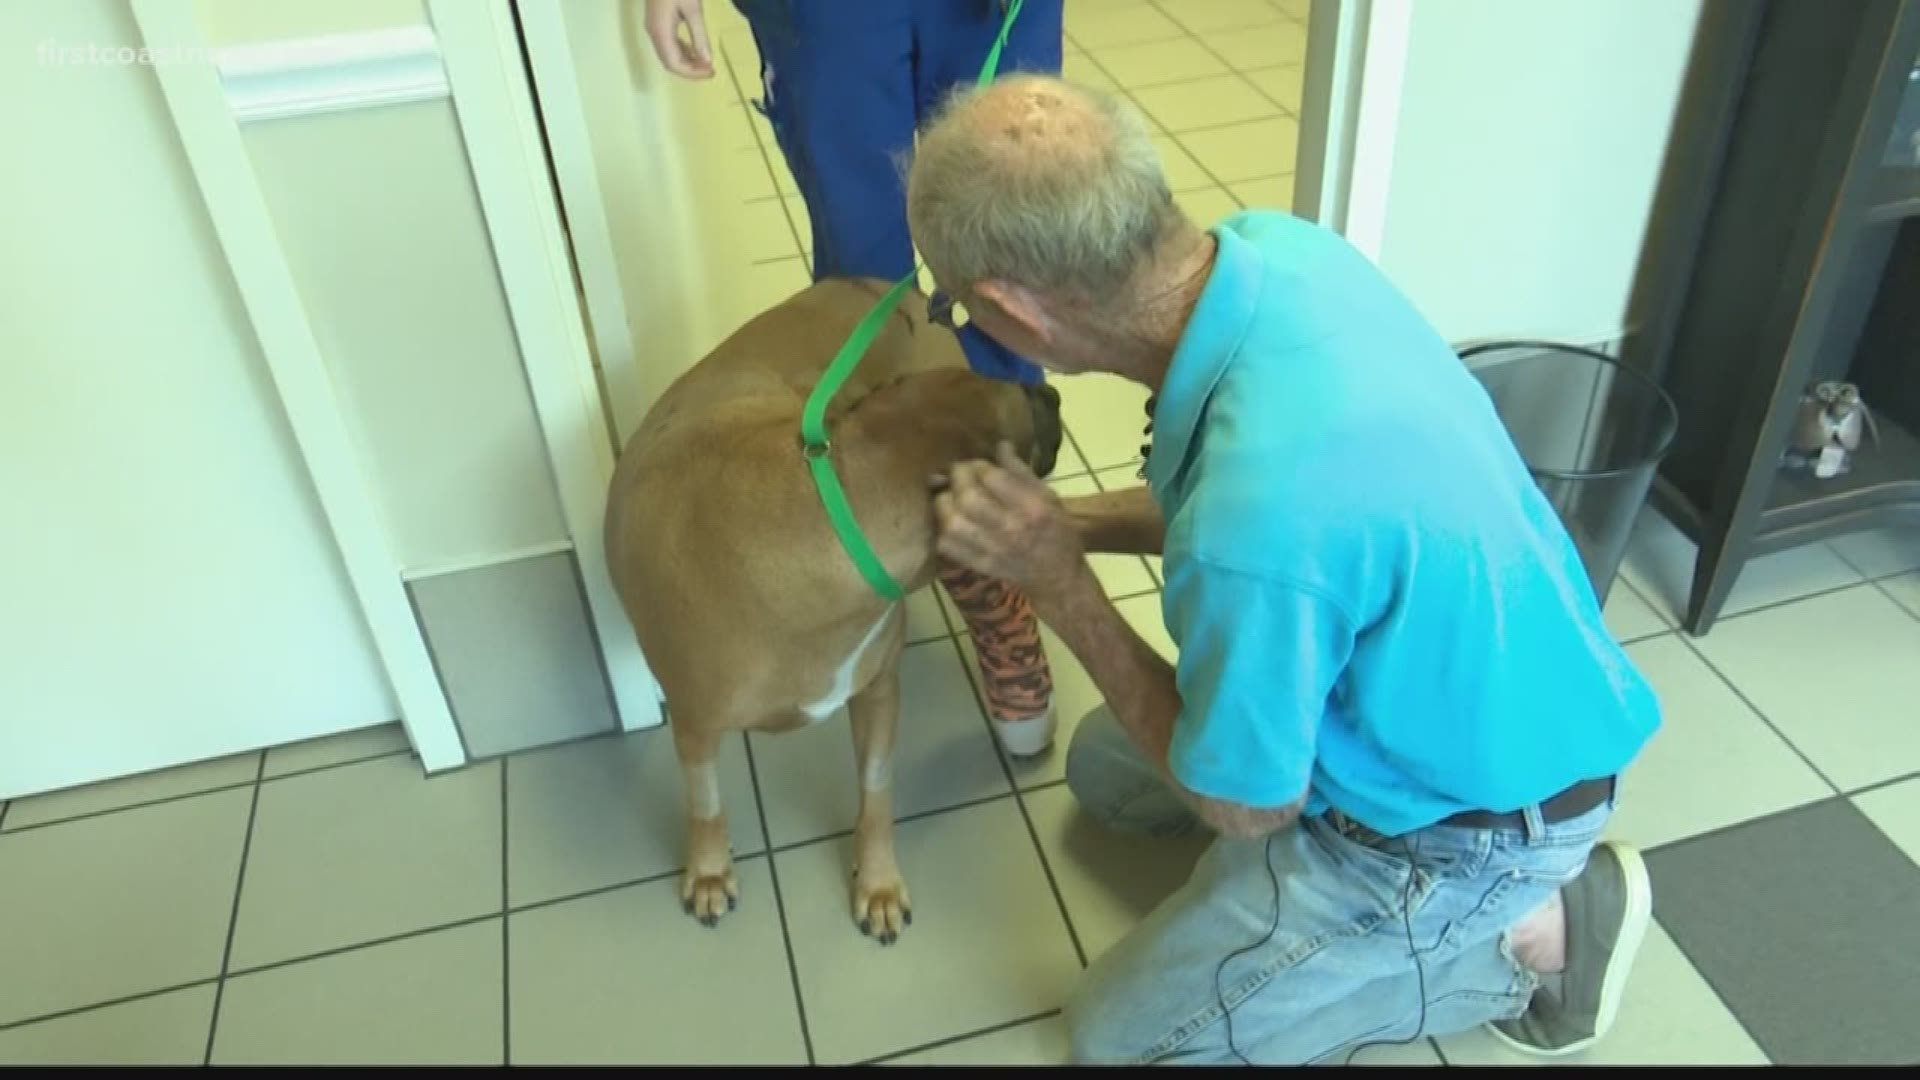 A dog that was attacked by a gator is reunited with his owner in Jacksonville after days worth of surgeries.